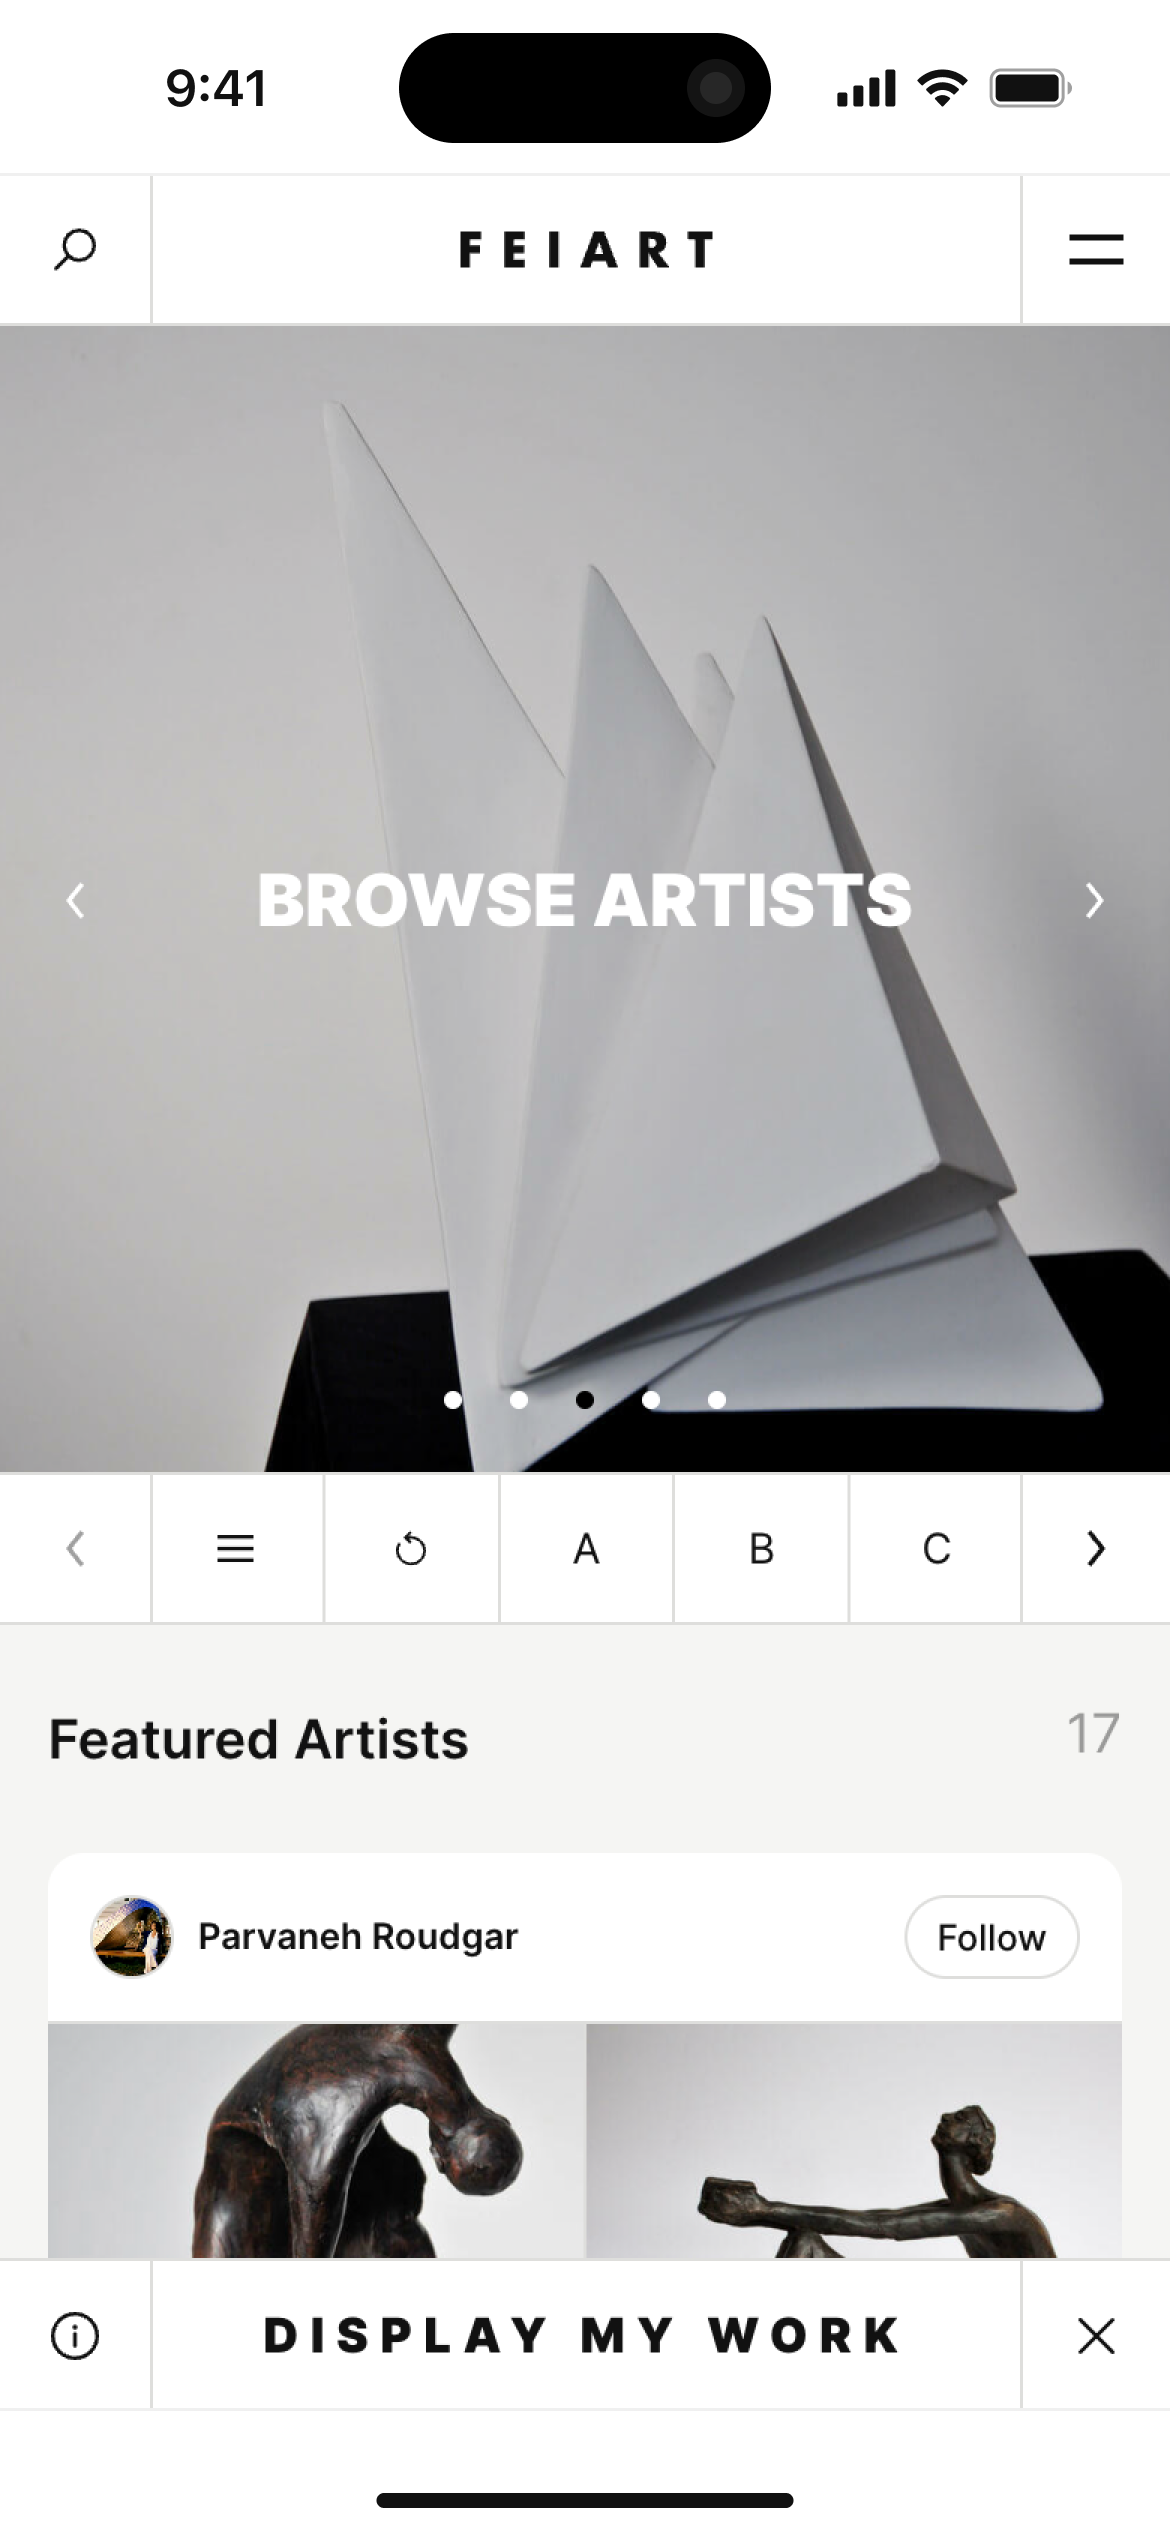 FEIART's responsive website design on a iPhone 14 mockup